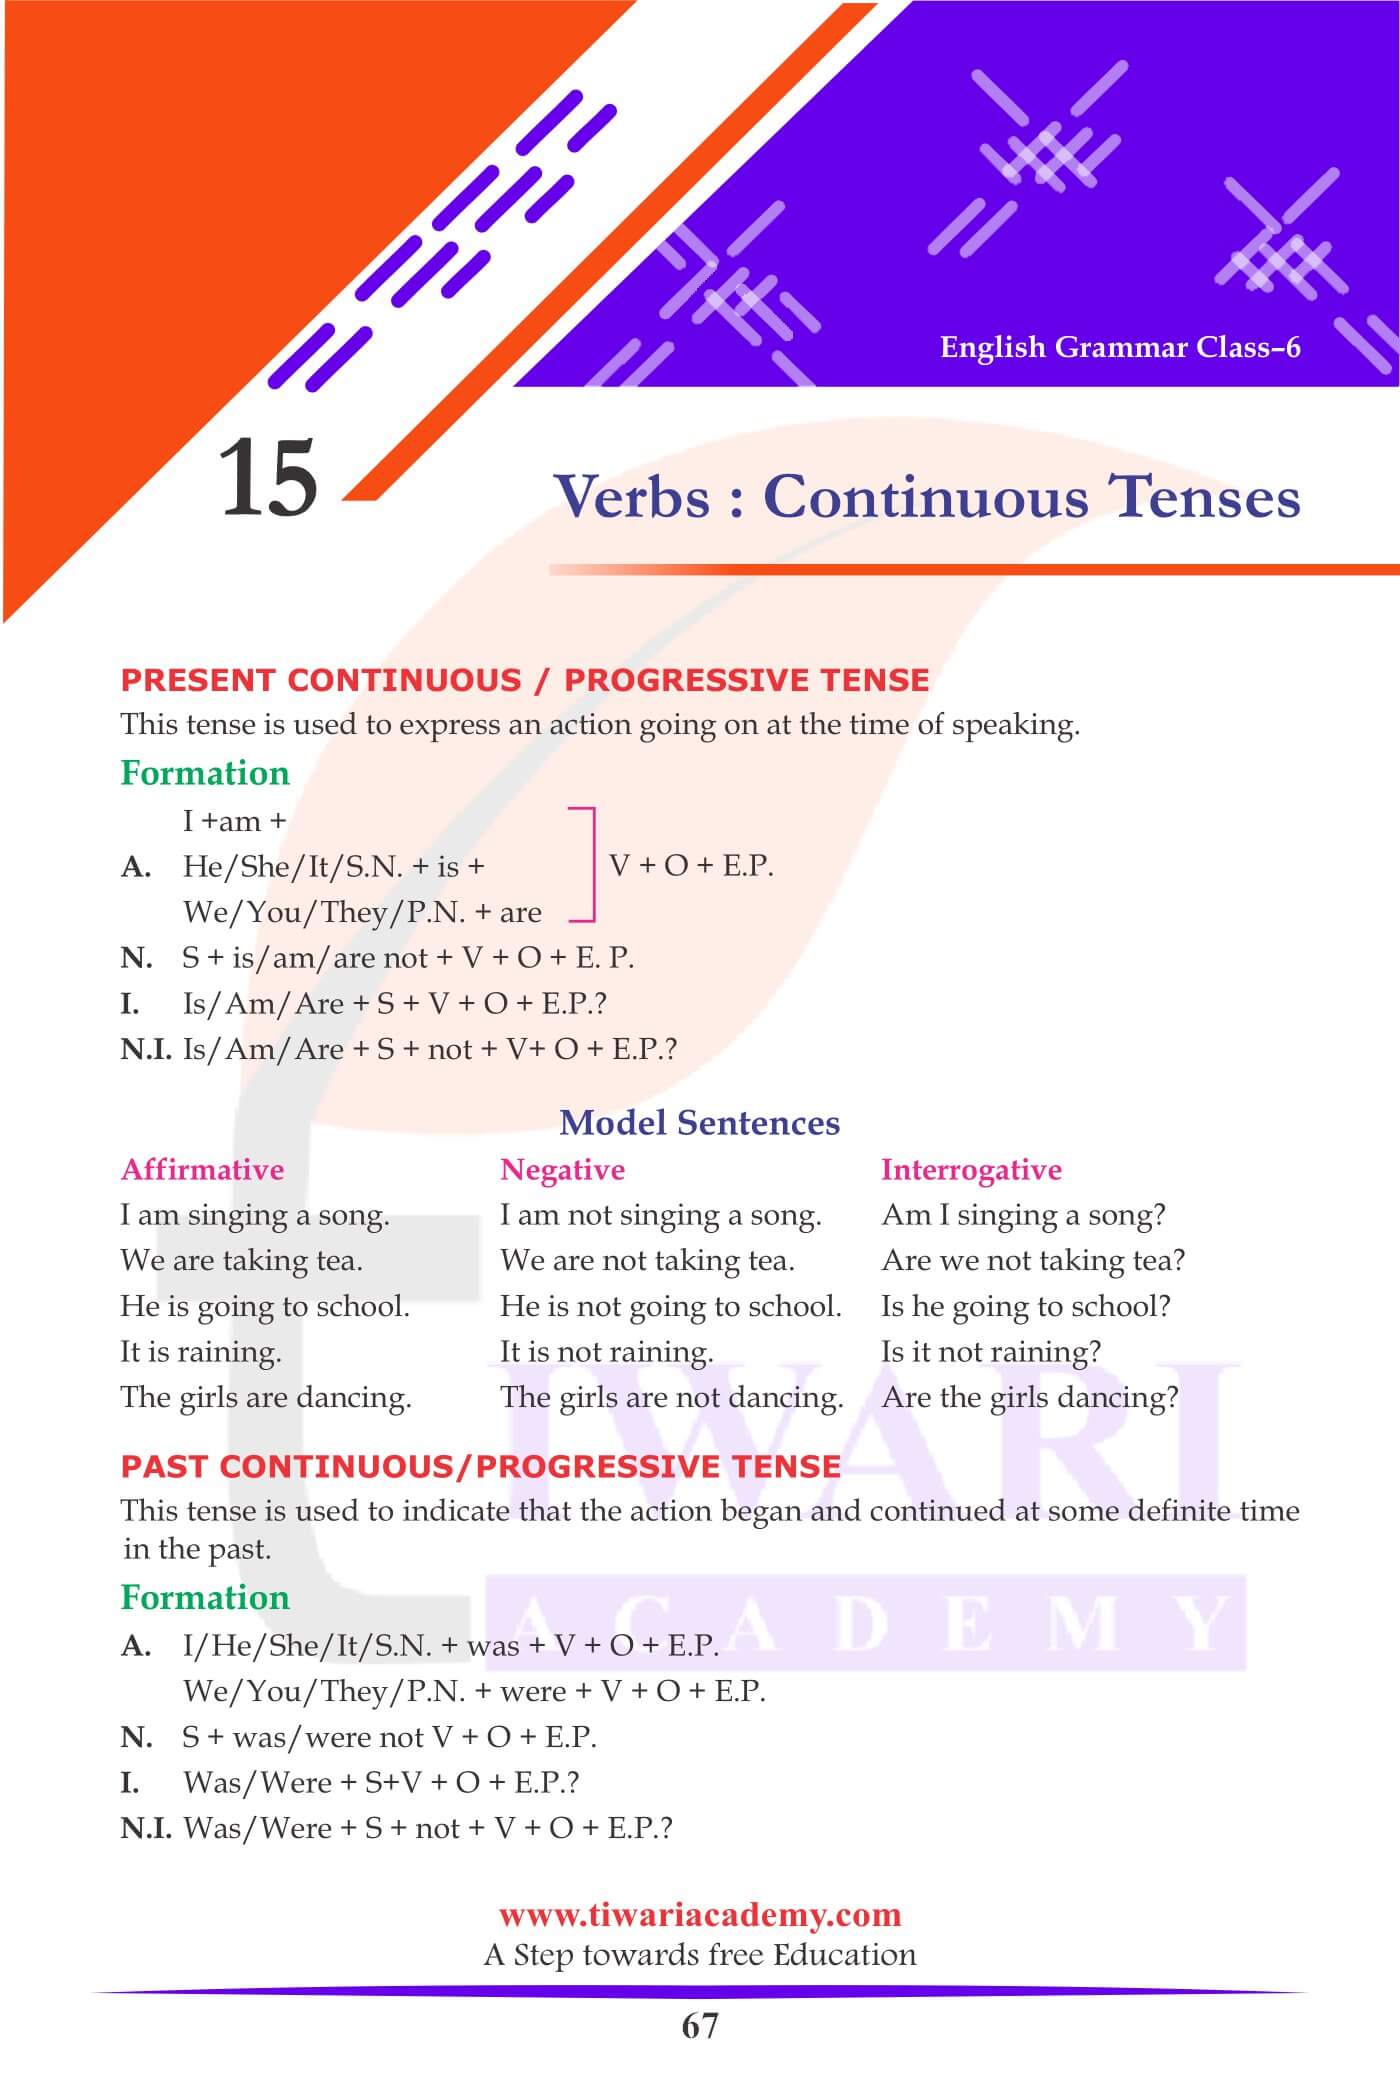 Class 6 English Grammar Chapter 15 Verbs Continuous Tenses